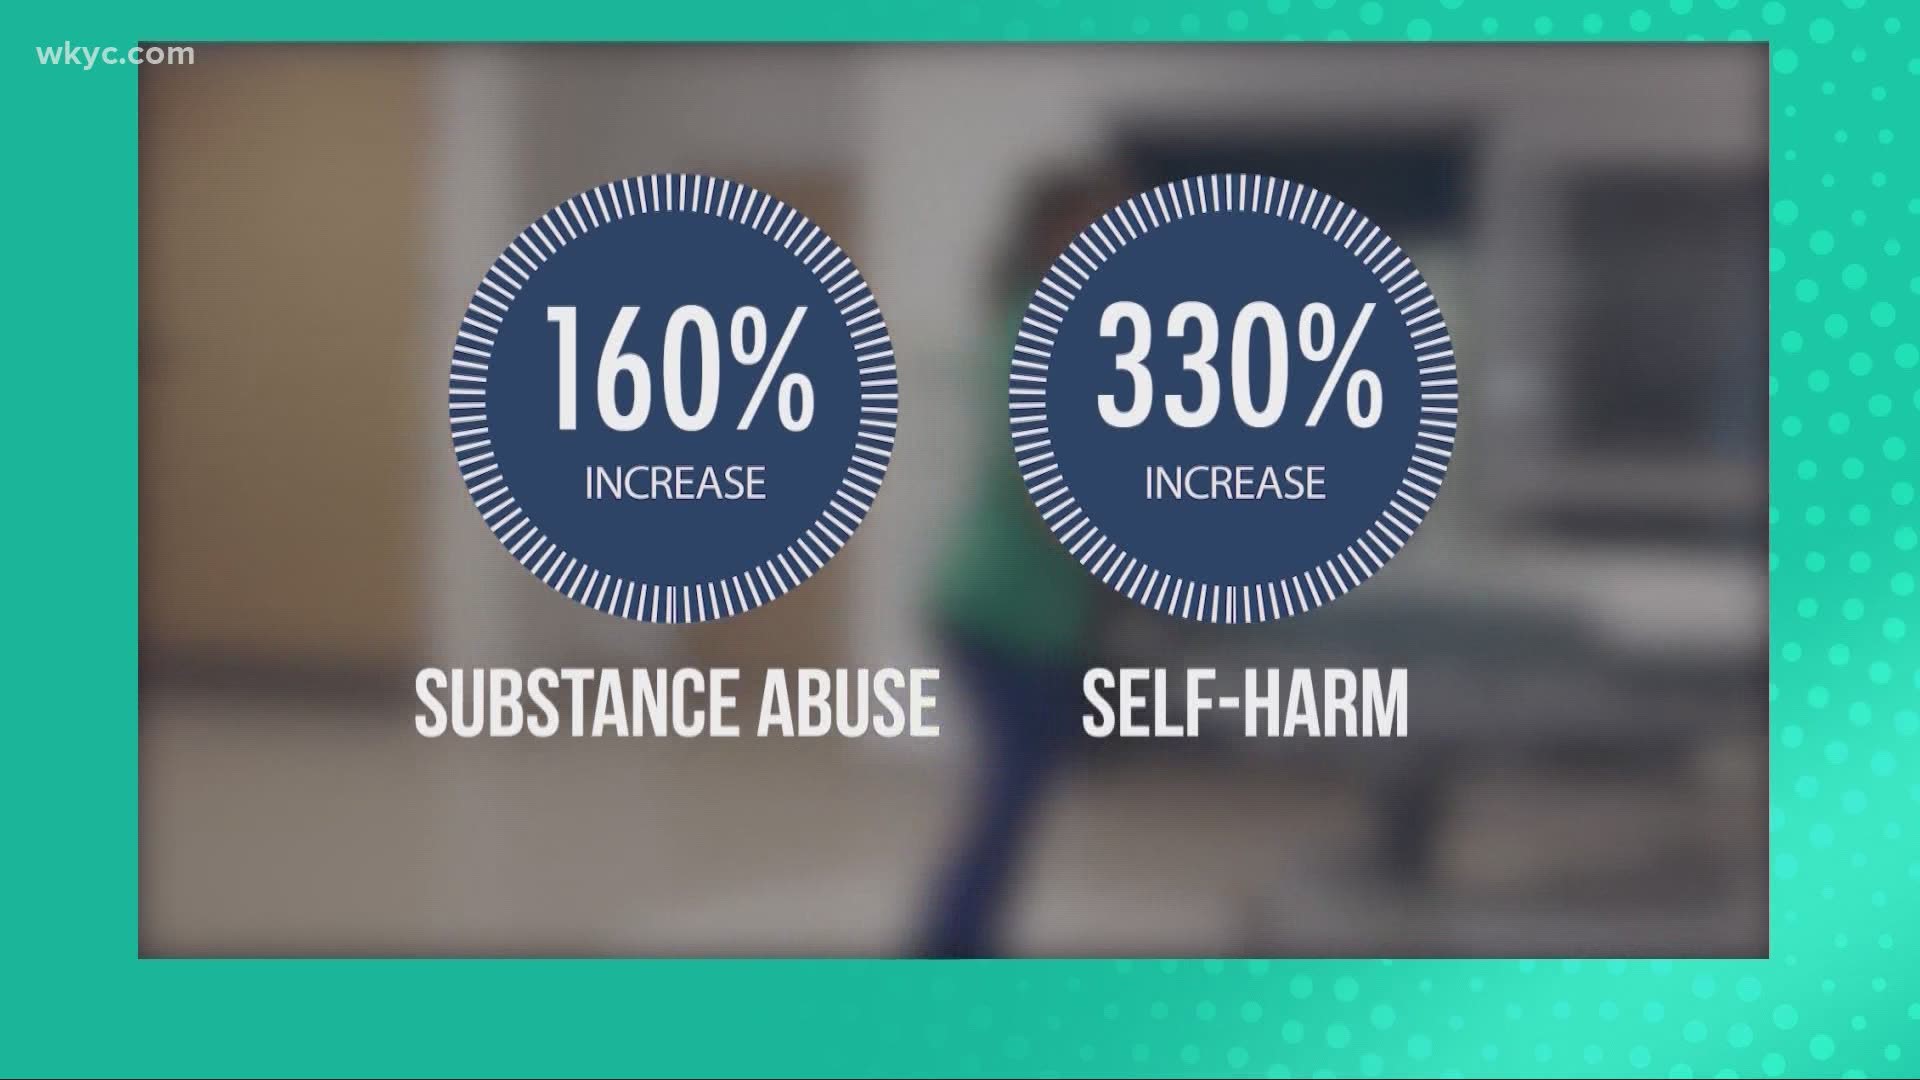 The highest jump was among 15- to 17-year-olds and more pronounced in girls. Dramatic increases in self-harm and substance use as reasons for ED visits.